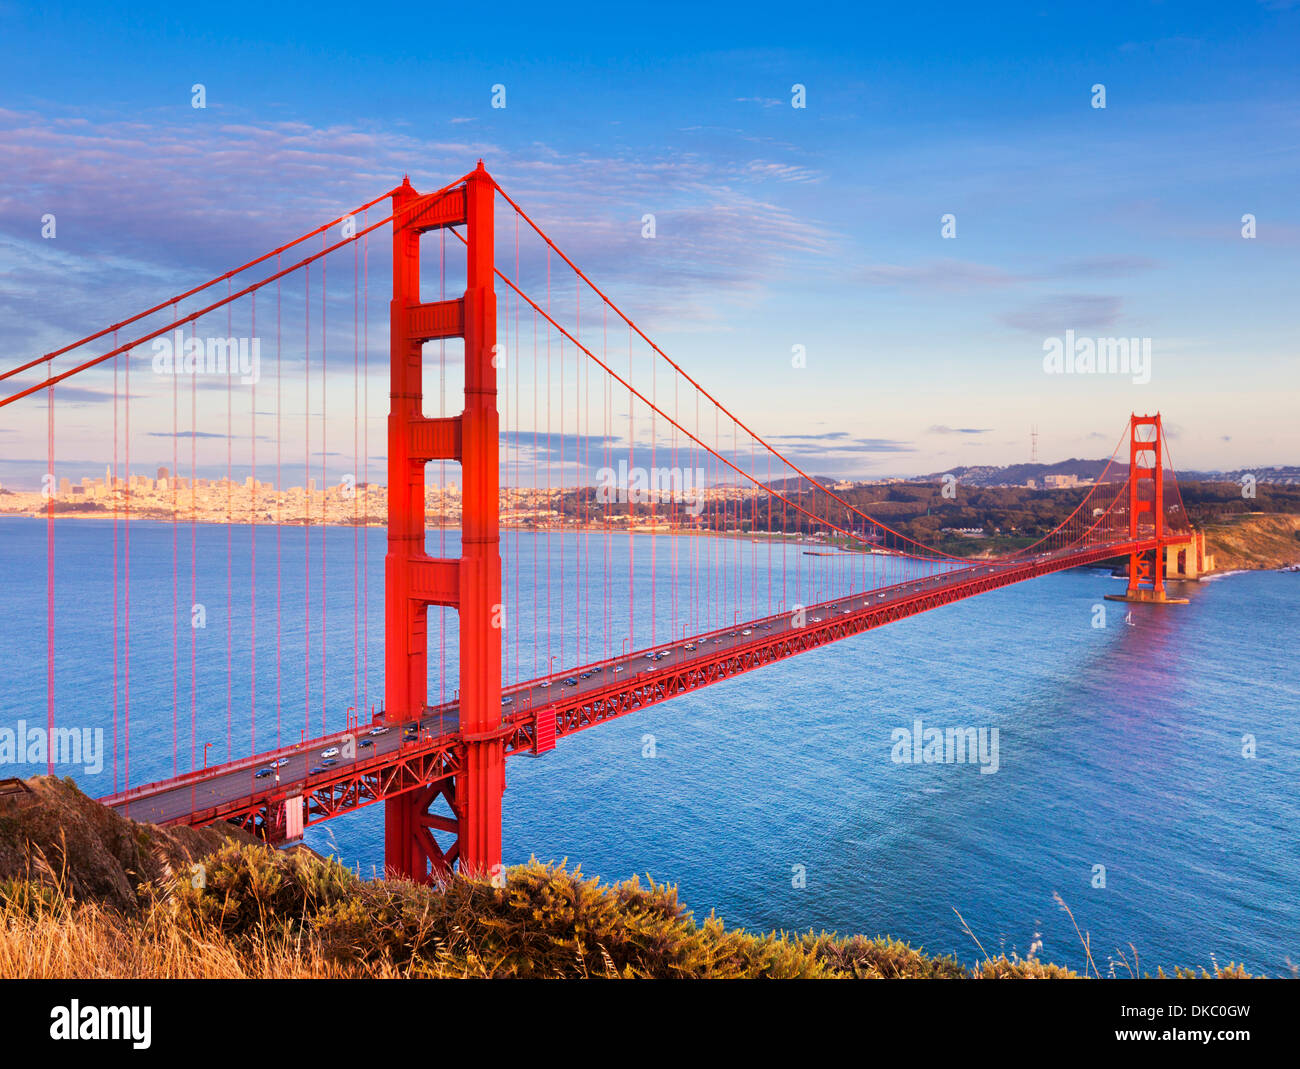 San Francisco Golden Gate Bridge from the mARIN HEADLANDS during the day with traffic crossing the bridge San Francisco California USA Stock Photo